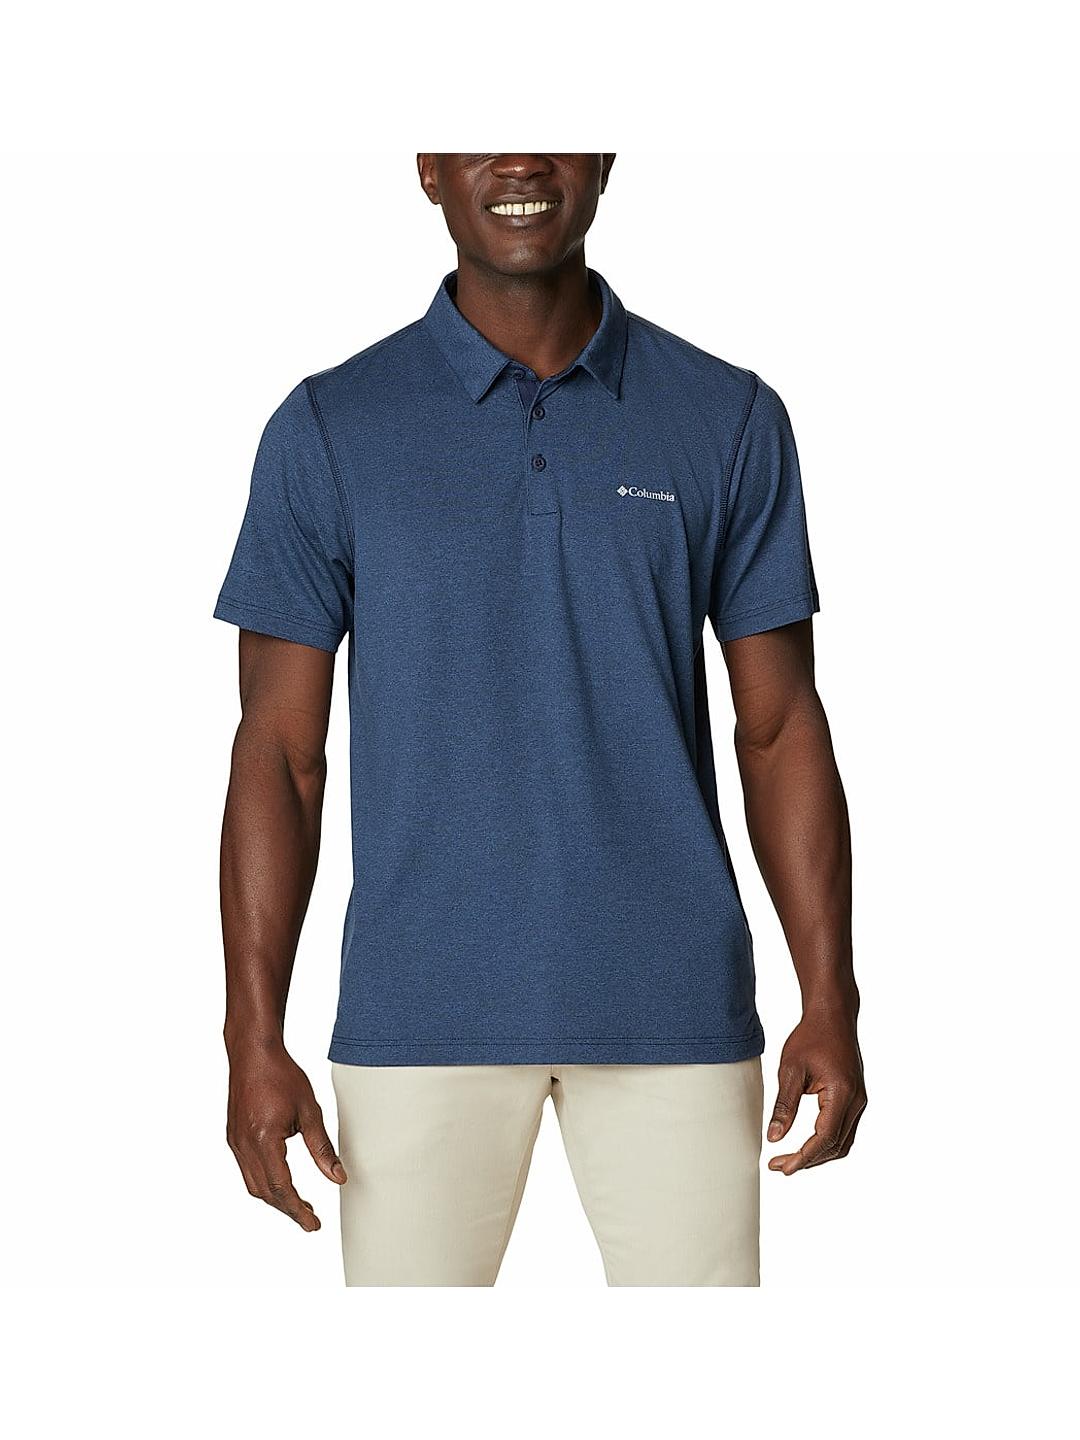 Buy Blue Tech Trail Polo for Men Online at Columbia Sportswear | 480911